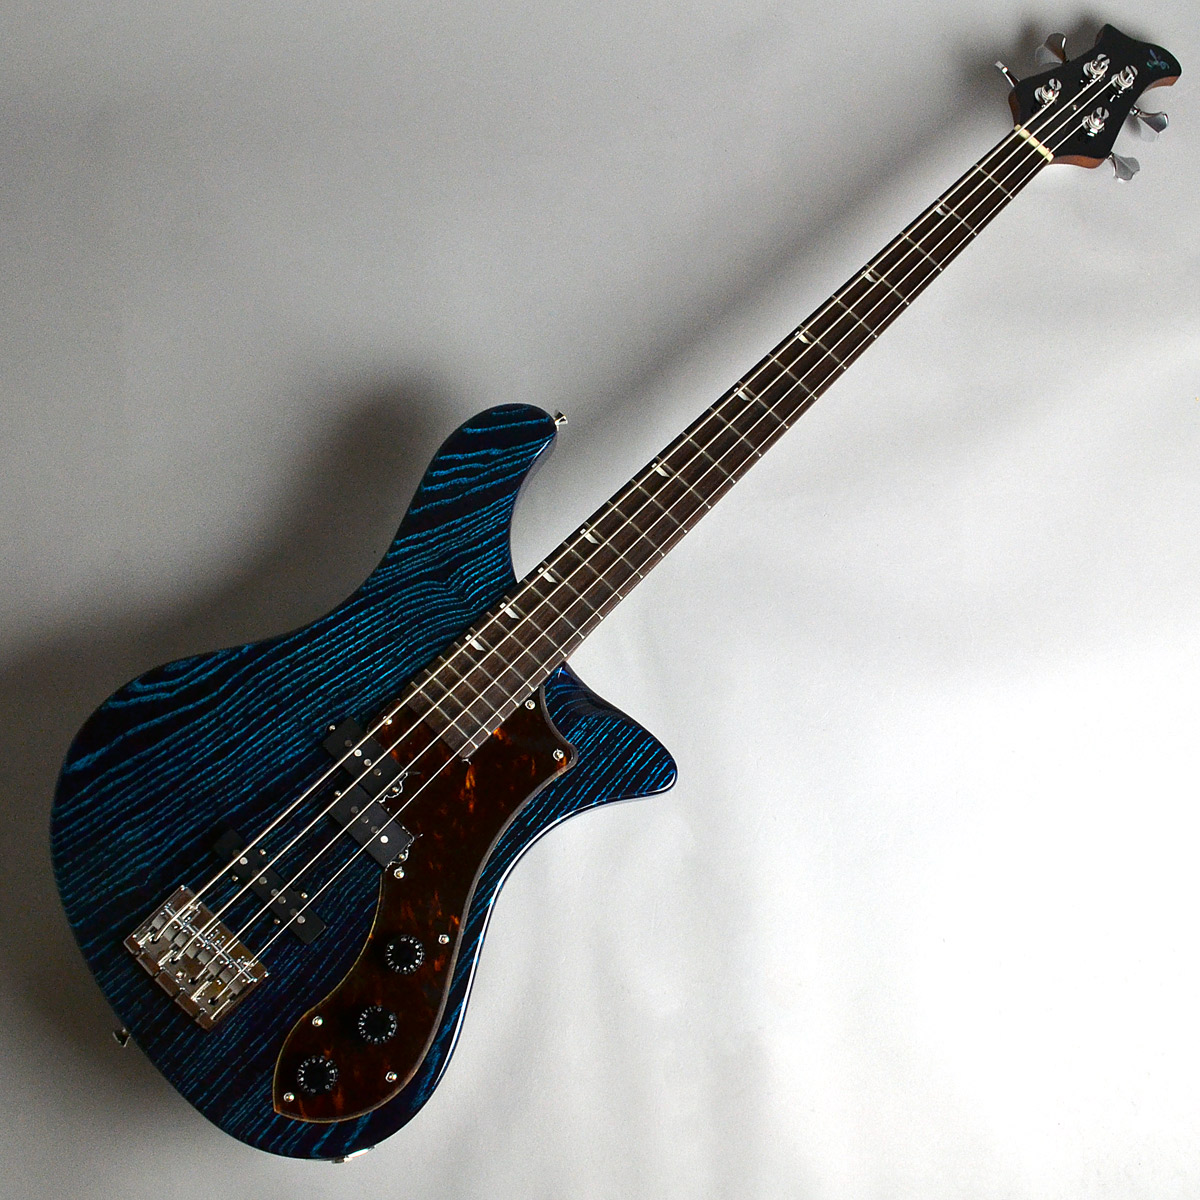 RYOGA「DIVER-BASS」に新モデルが登場。